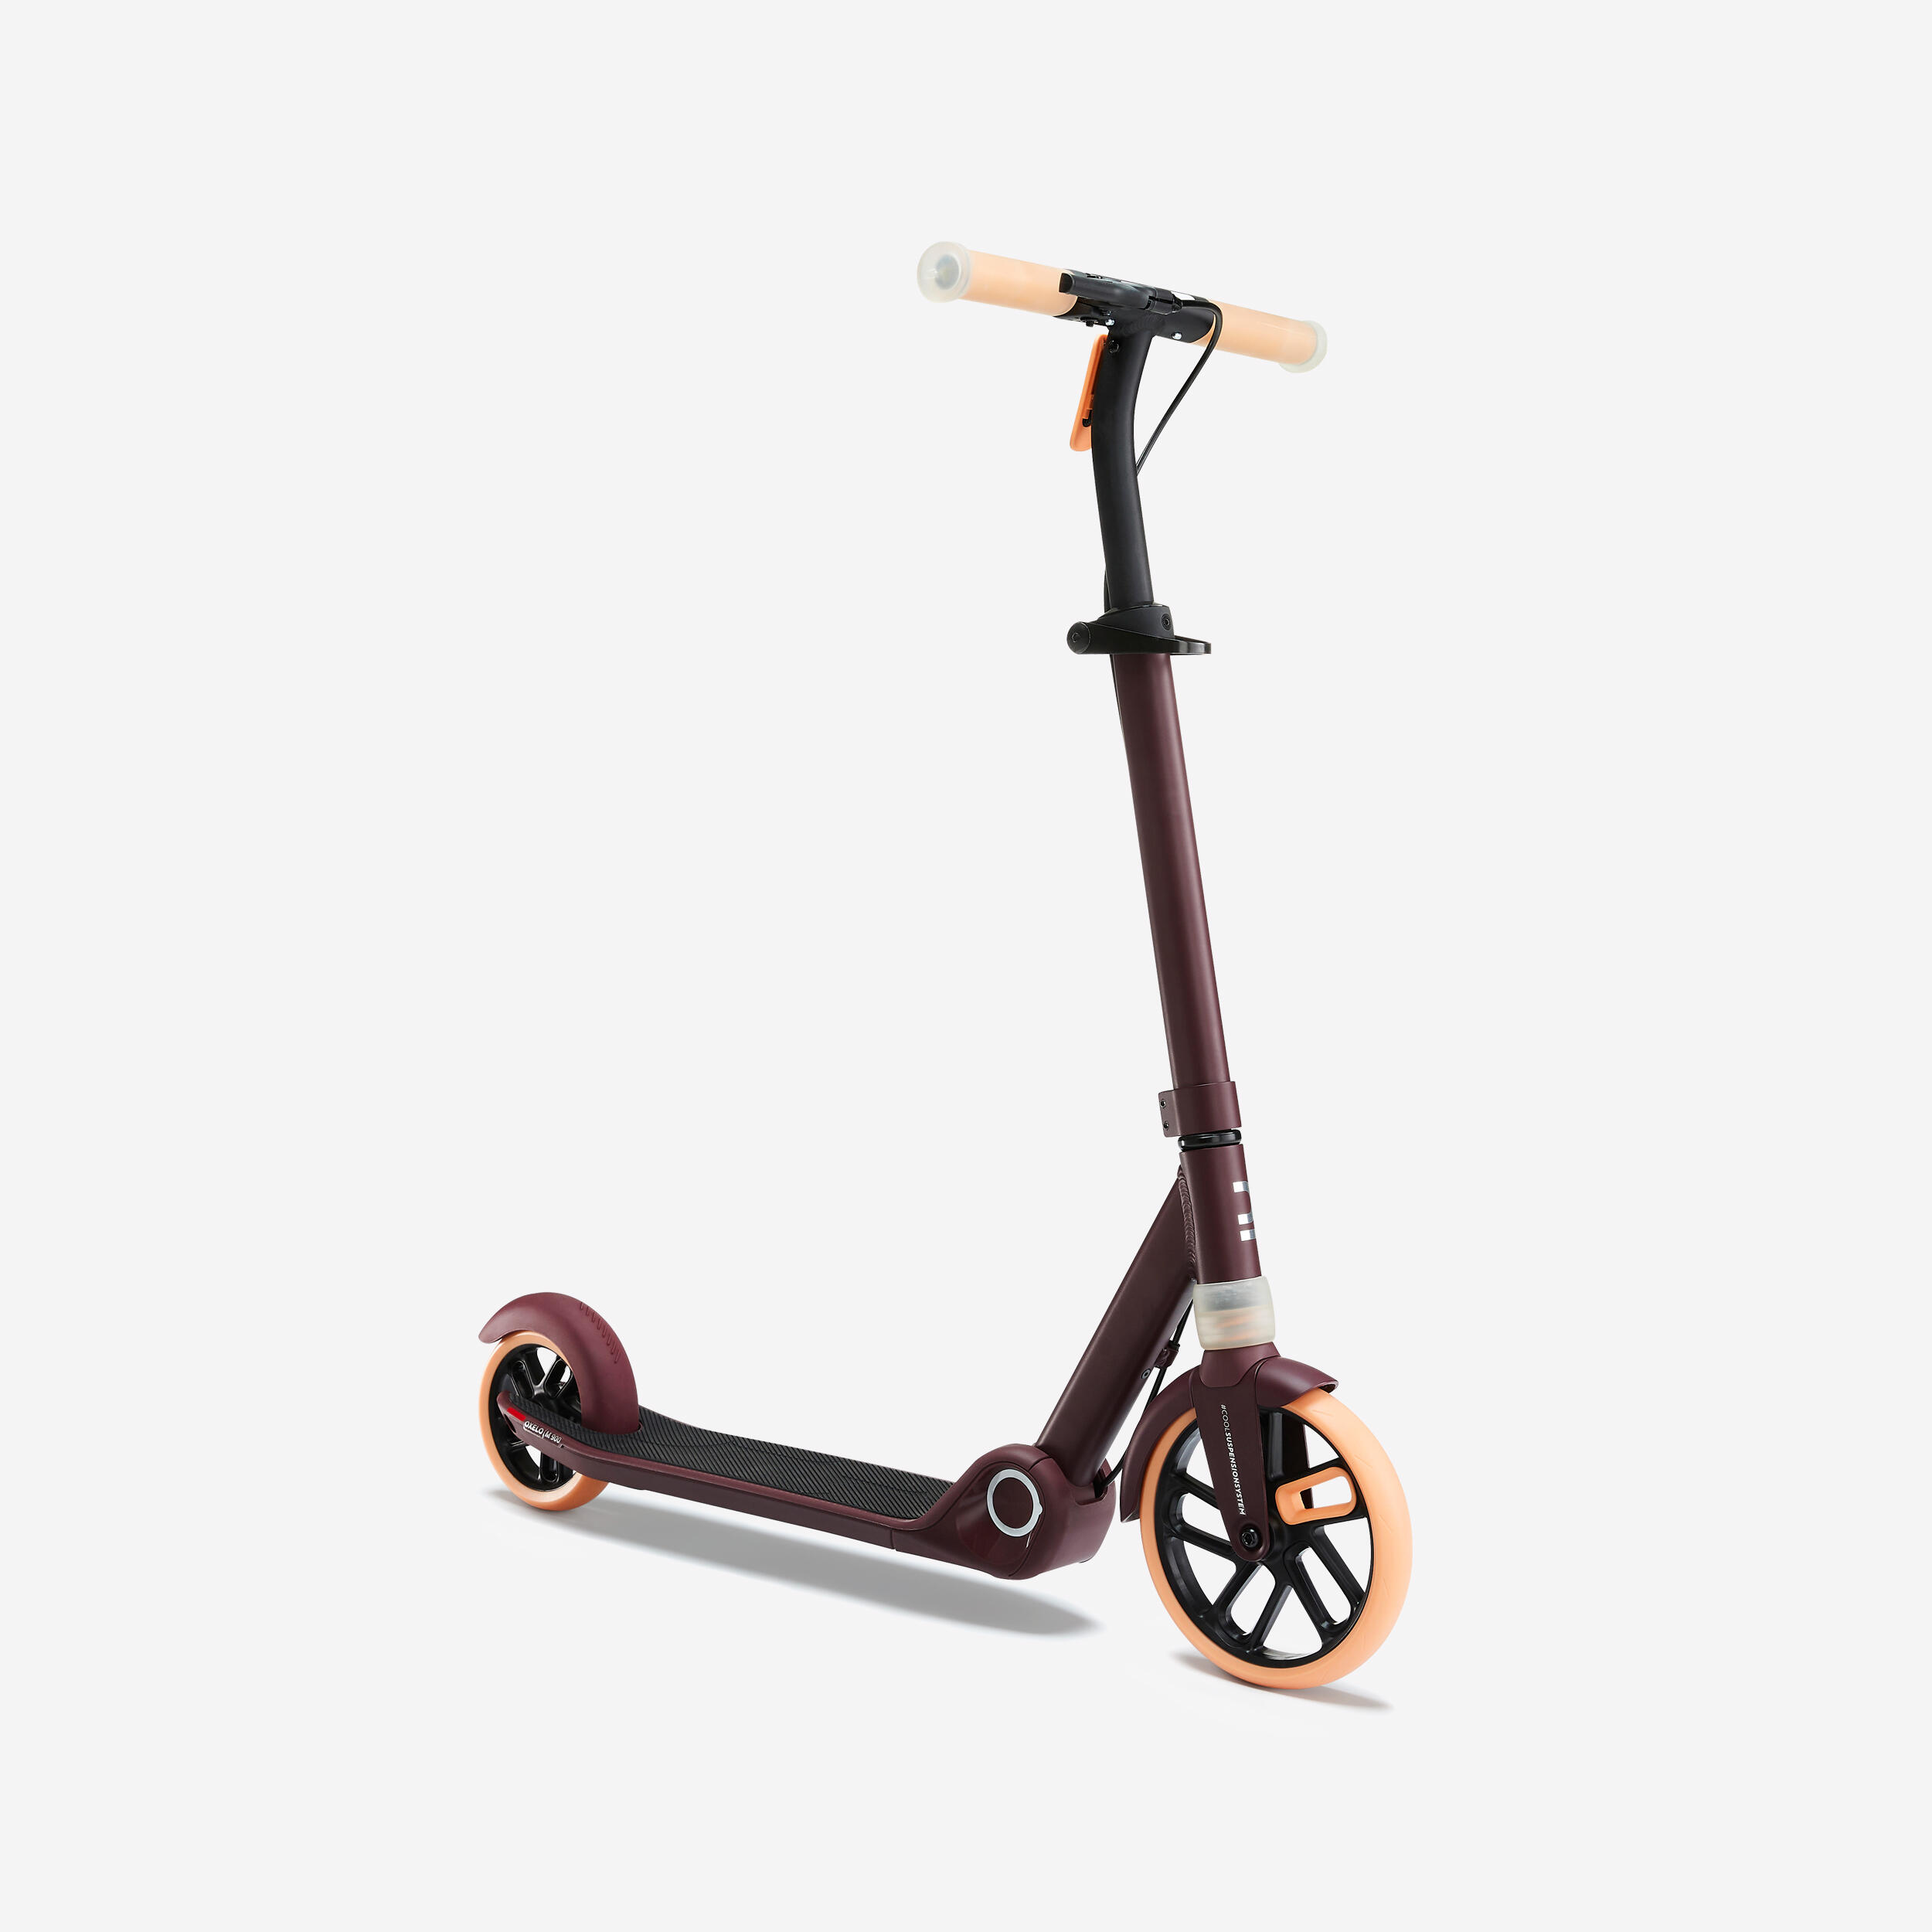 OXELO Kids' Scooter M900 - Burgundy/Coral